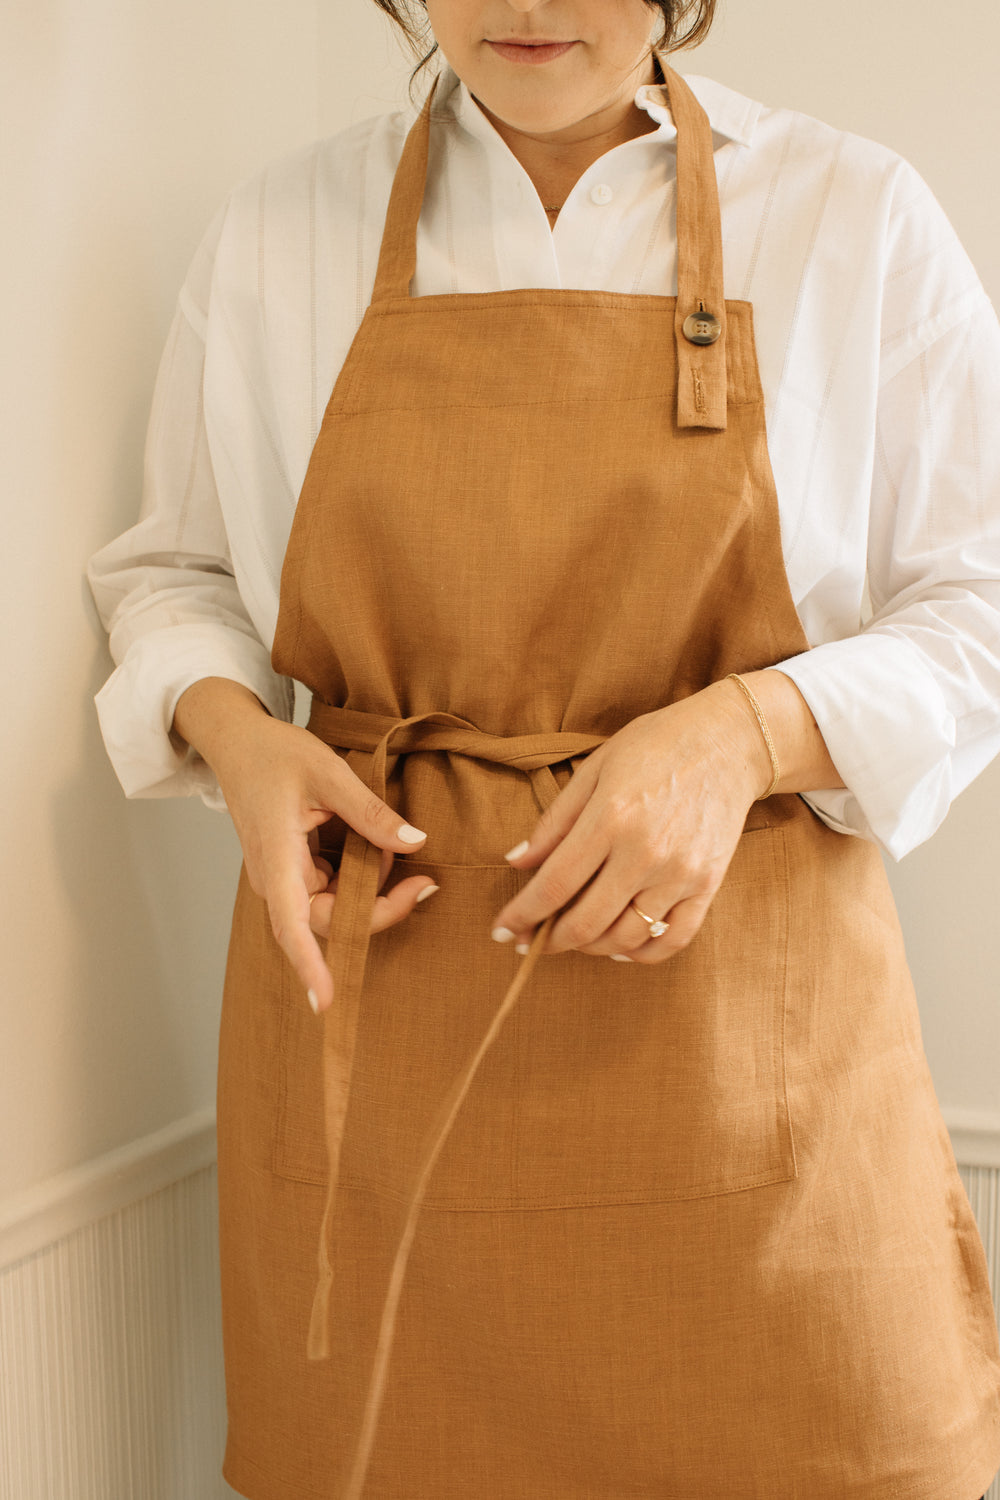 Linen Apron in Tan - Whimsy & Row